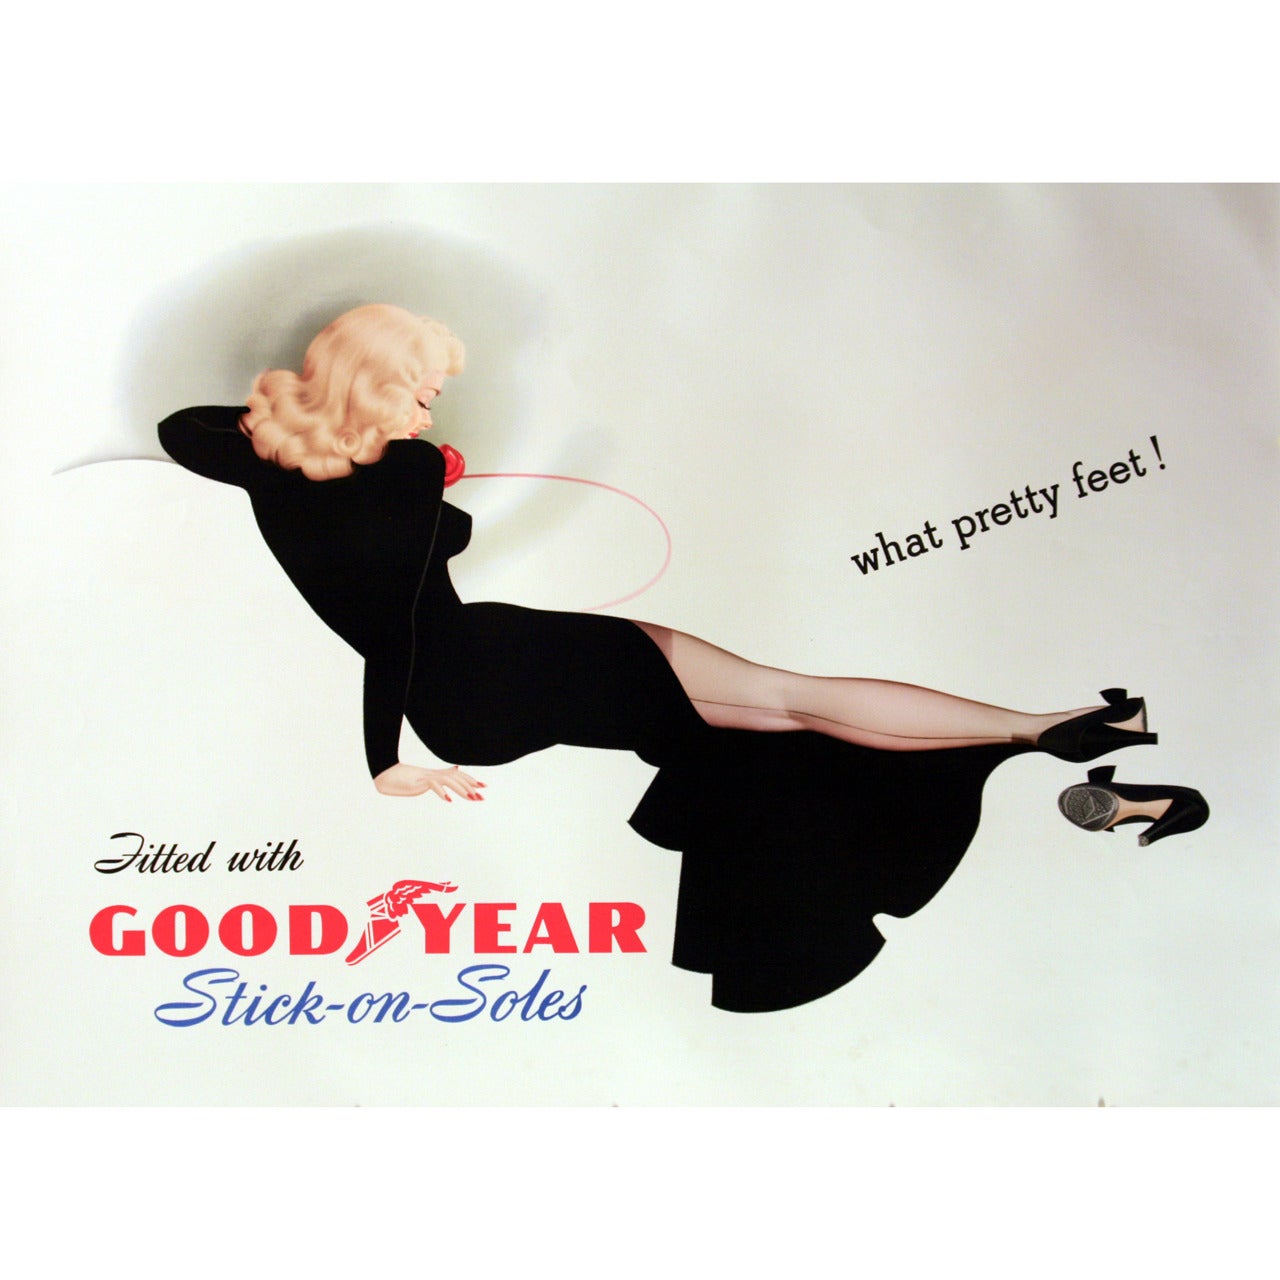 Original Vintage Pin Up Style Advertising Poster for Goodyear Stick on Soles